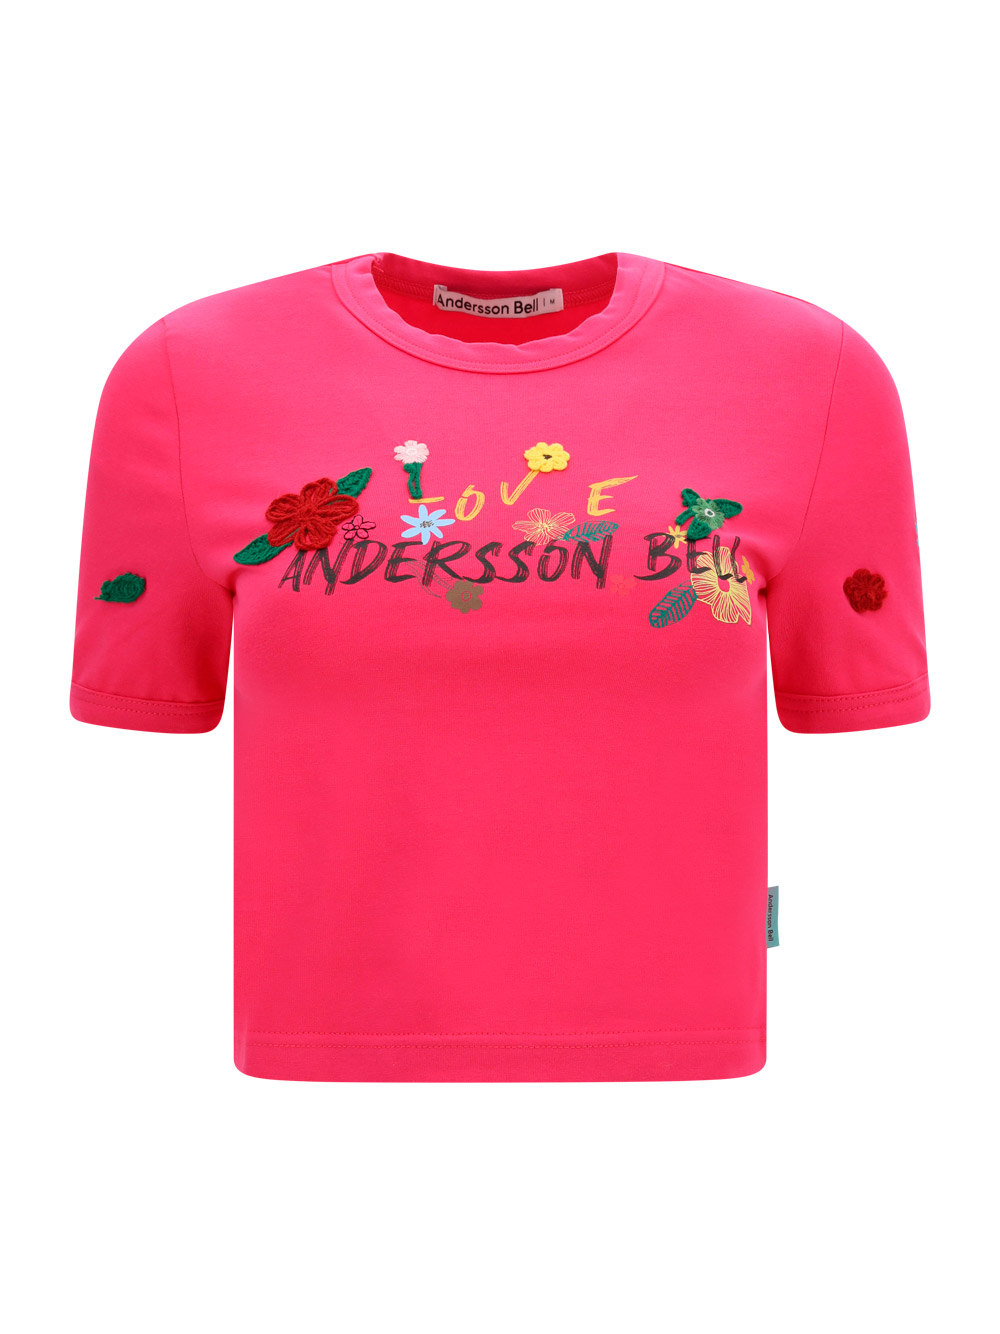 ANDERSSON BELL DASHA T-SHIRT,ATB894W_PINK